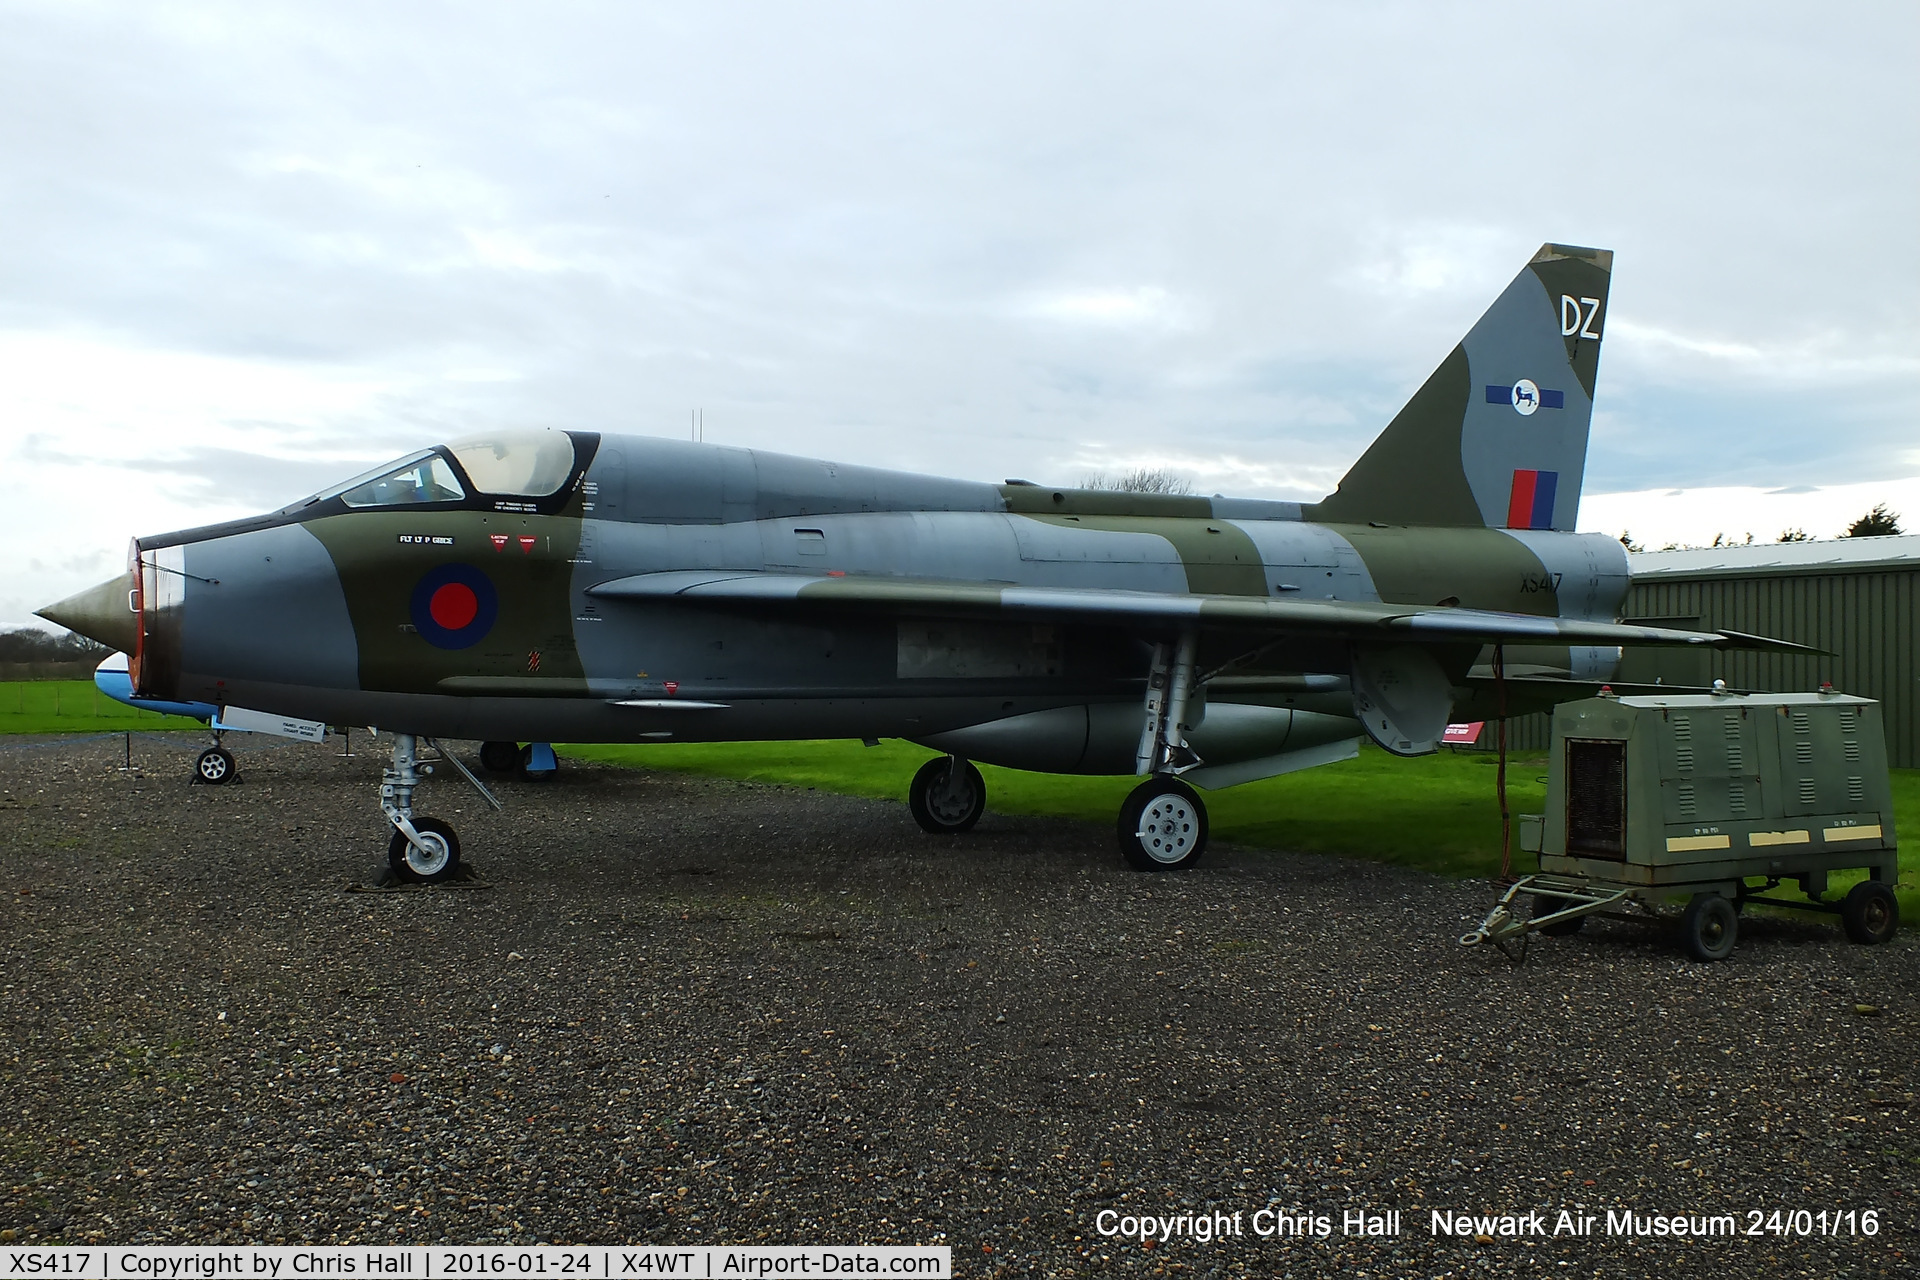 XS417, 1964 English Electric Lightning T.5 C/N 95002, at the Newark Air Museum